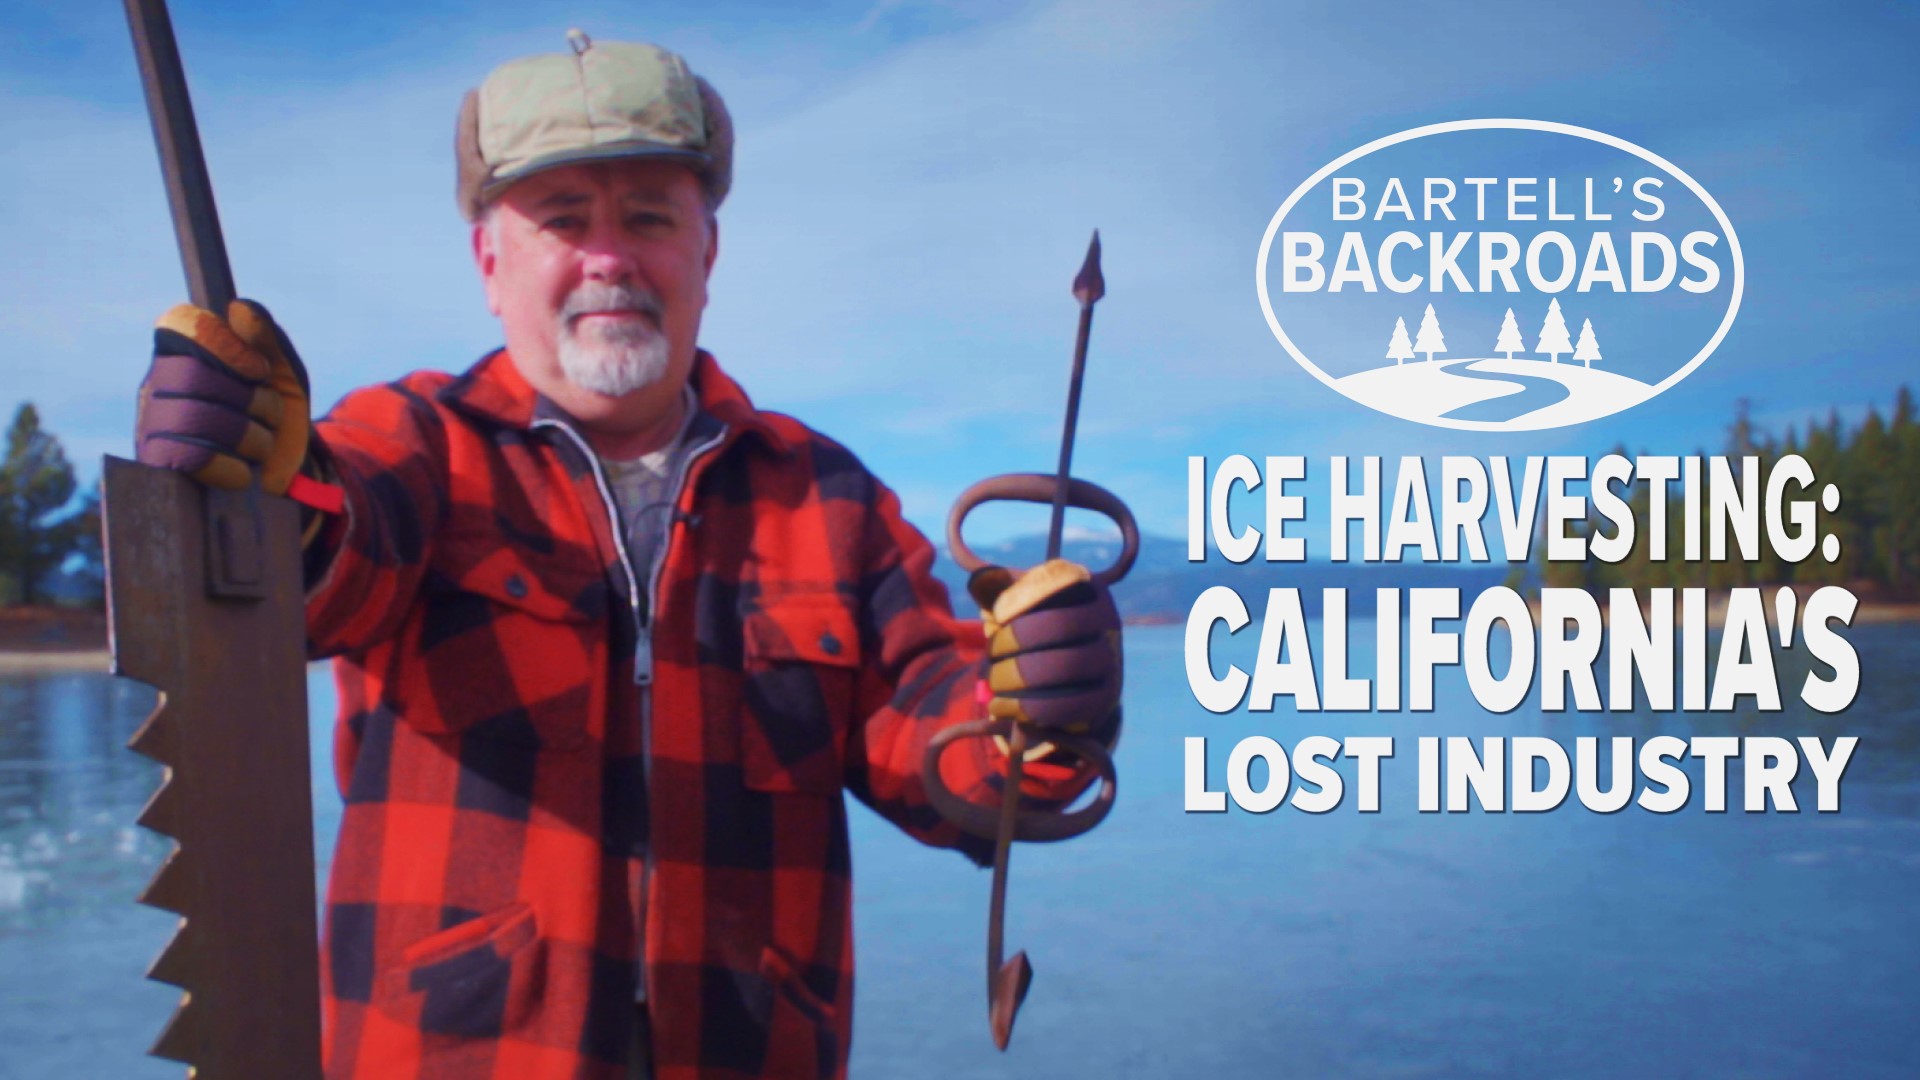 Before refrigeration, ice harvesters worked on the frozen lakes of the Sierra, bringing back blocks of crystal cold to help people keep their food from spoiling. John Bartell hit the backroads to see if it was as fun as Disney made it look in 'Frozen.'